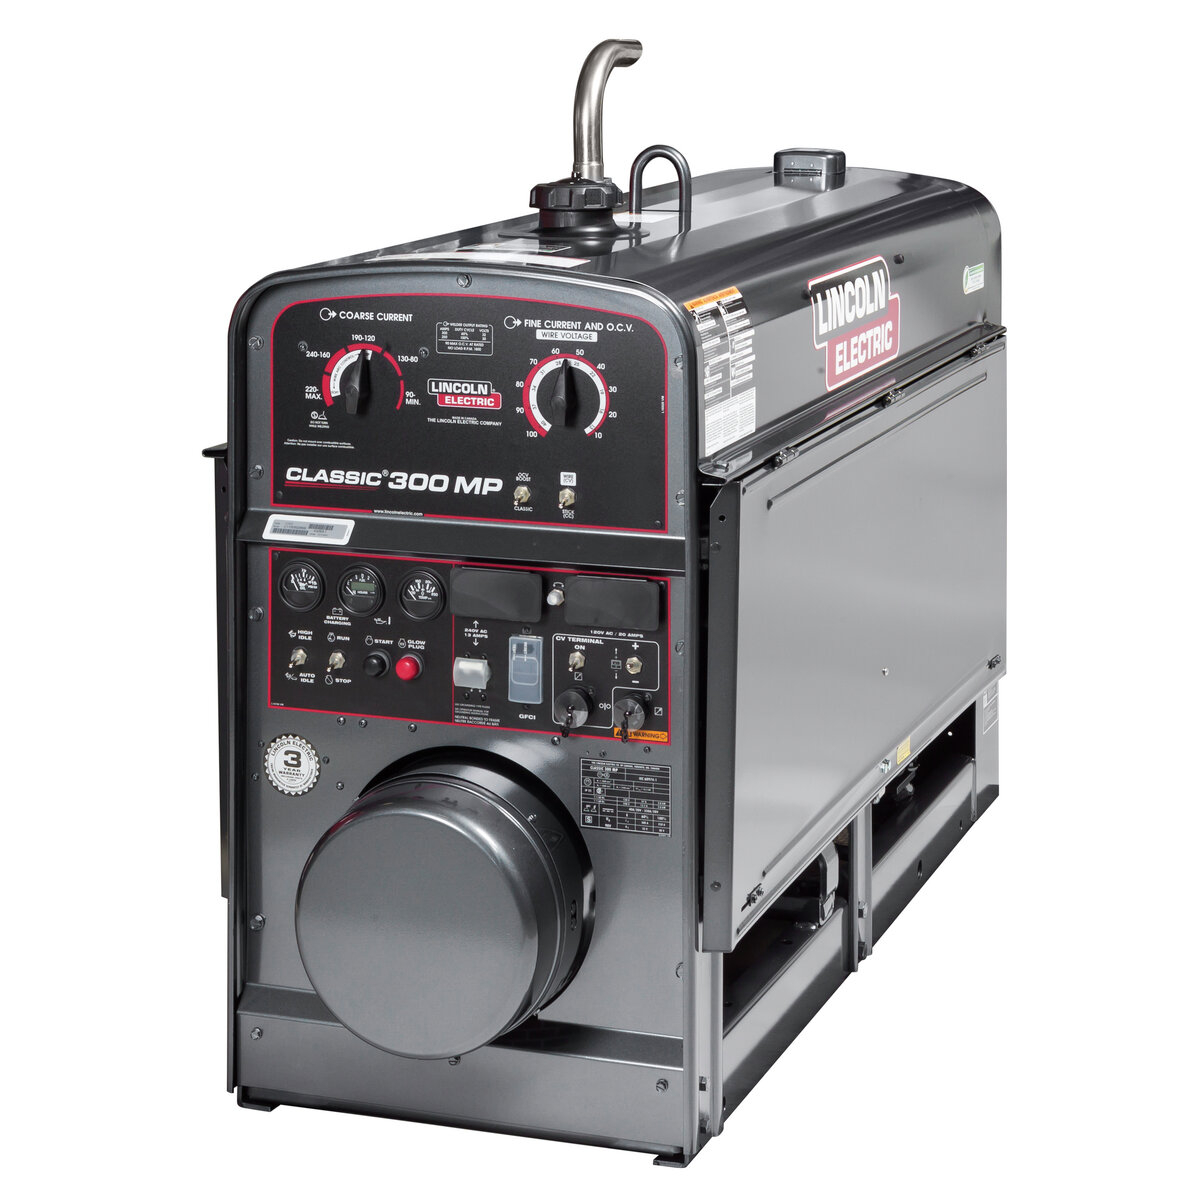 Traditional welder/generator with pure DC output for multi-process welding applications. Features 120 VAC and 240 VAC single phase auxiliary power and powered by a 24.7 hp Kubota® D1503 diesel engine.